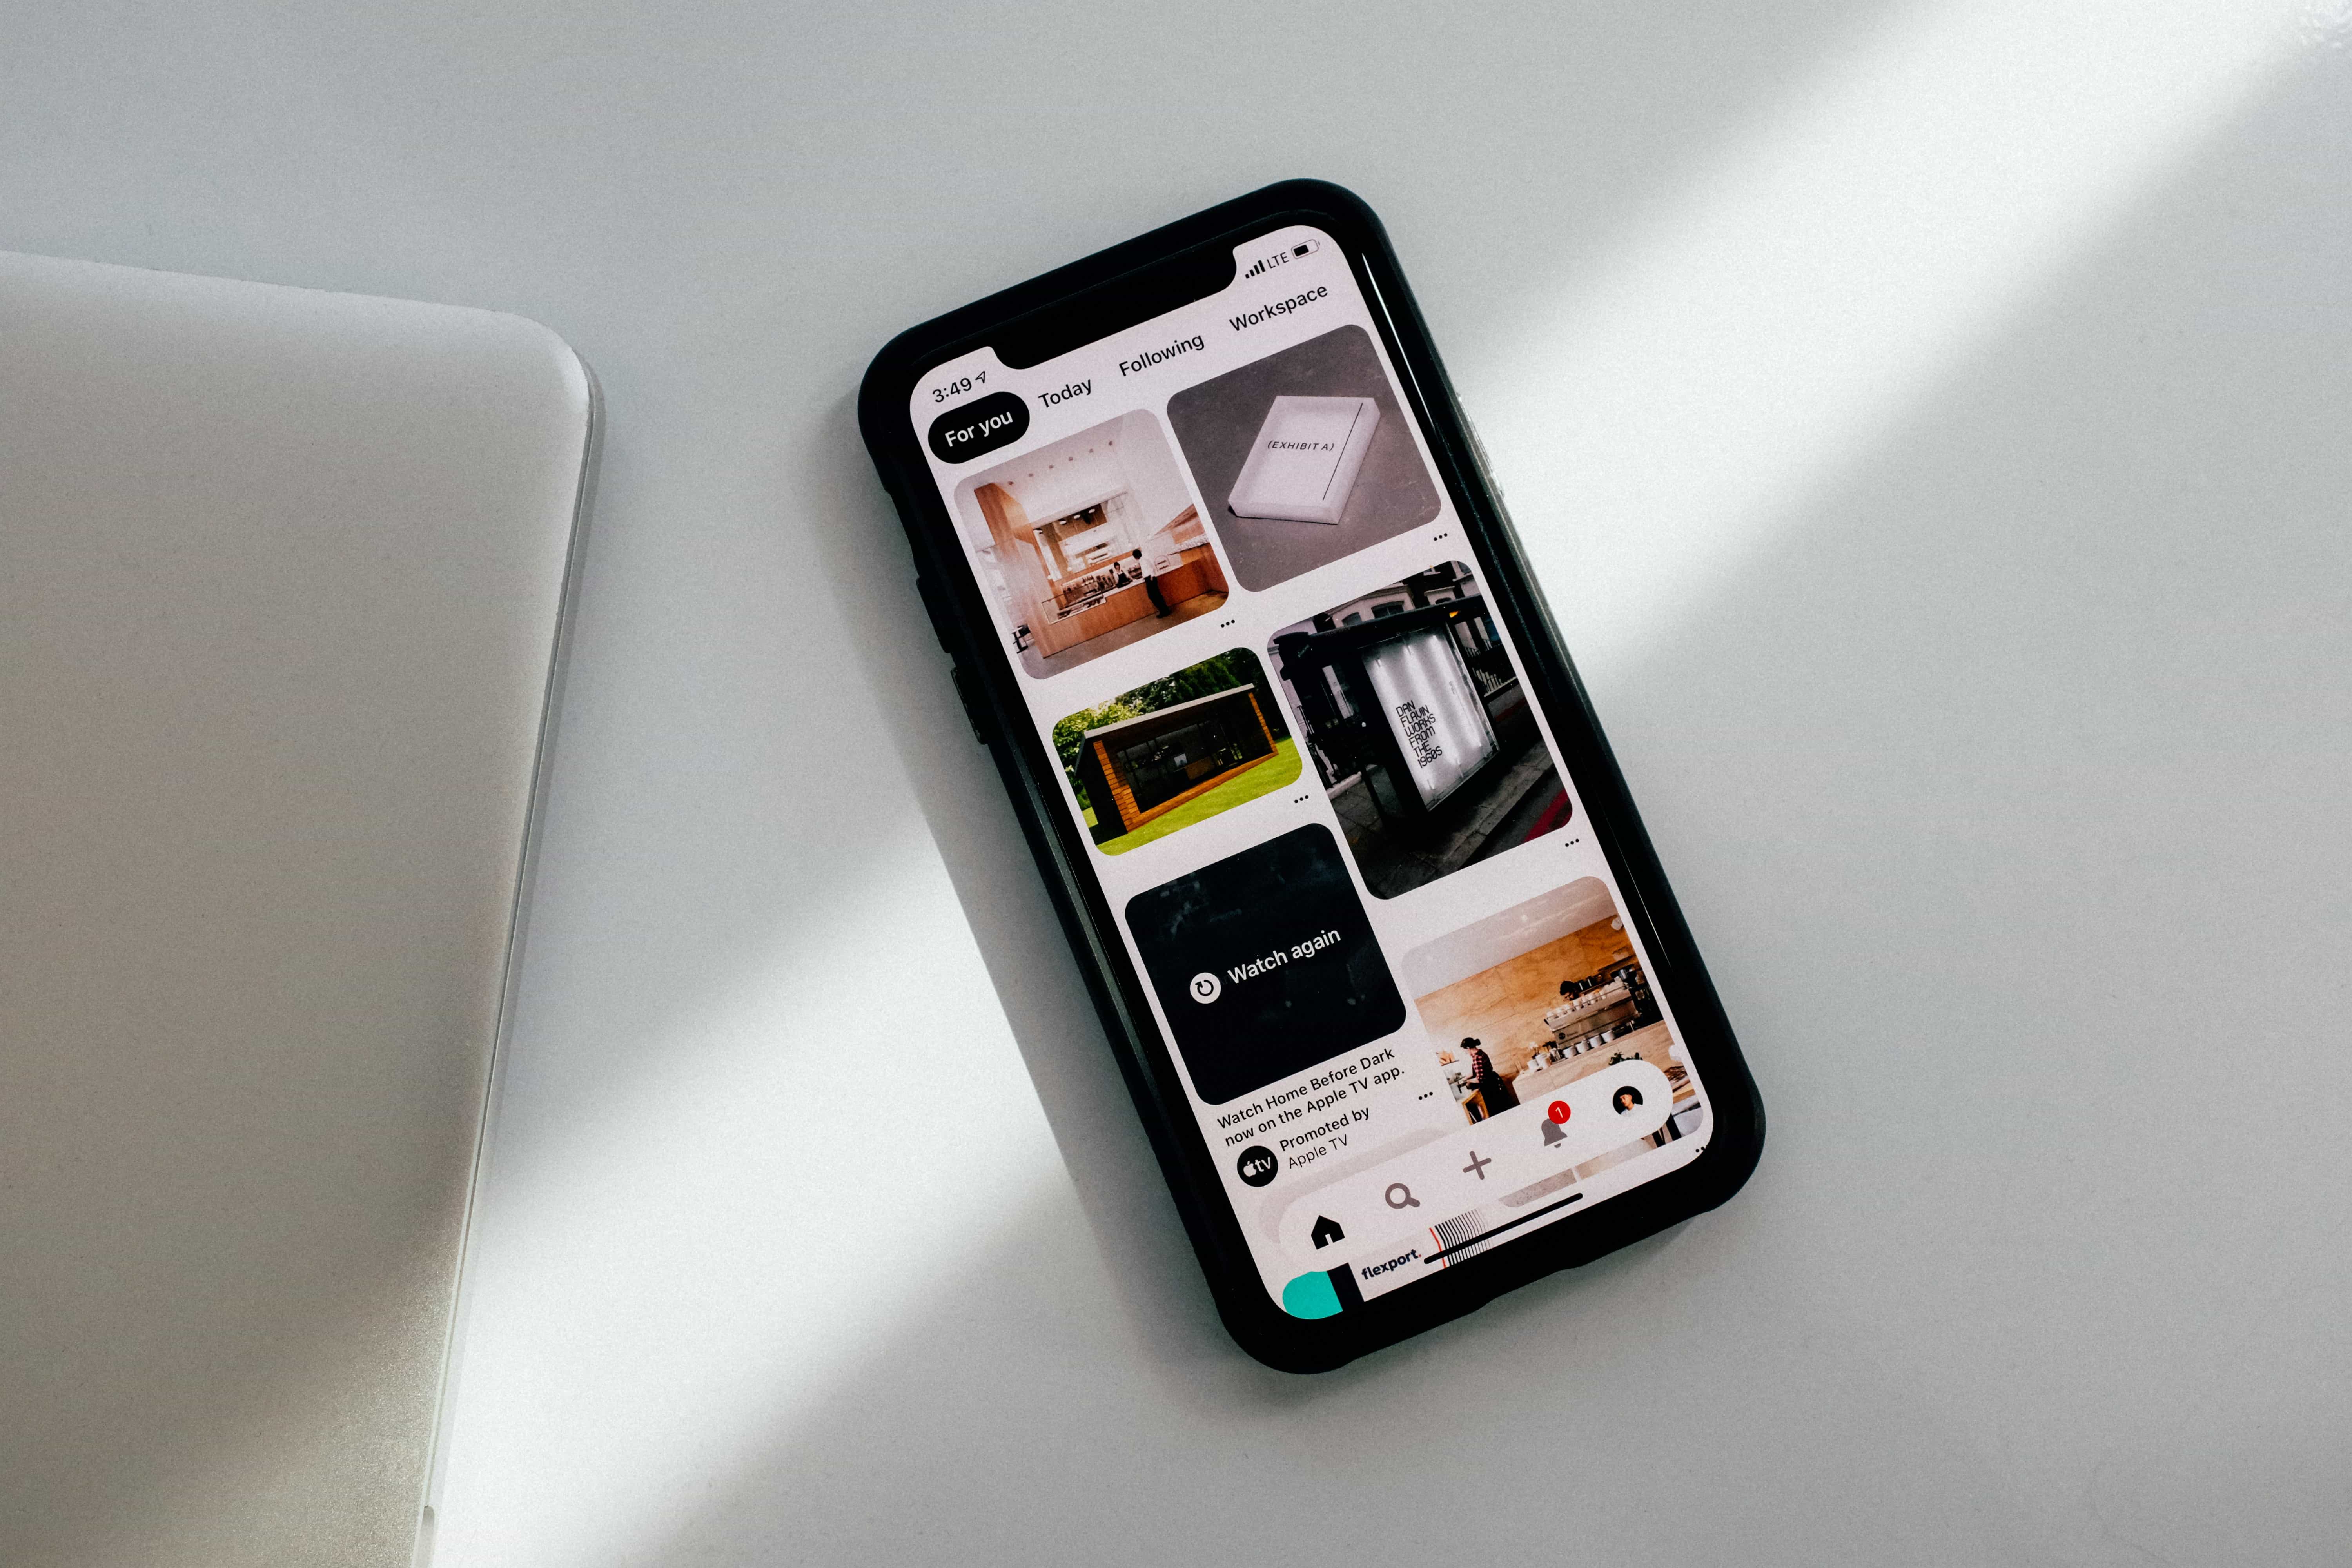 an image of an iphone with Pinterest app open